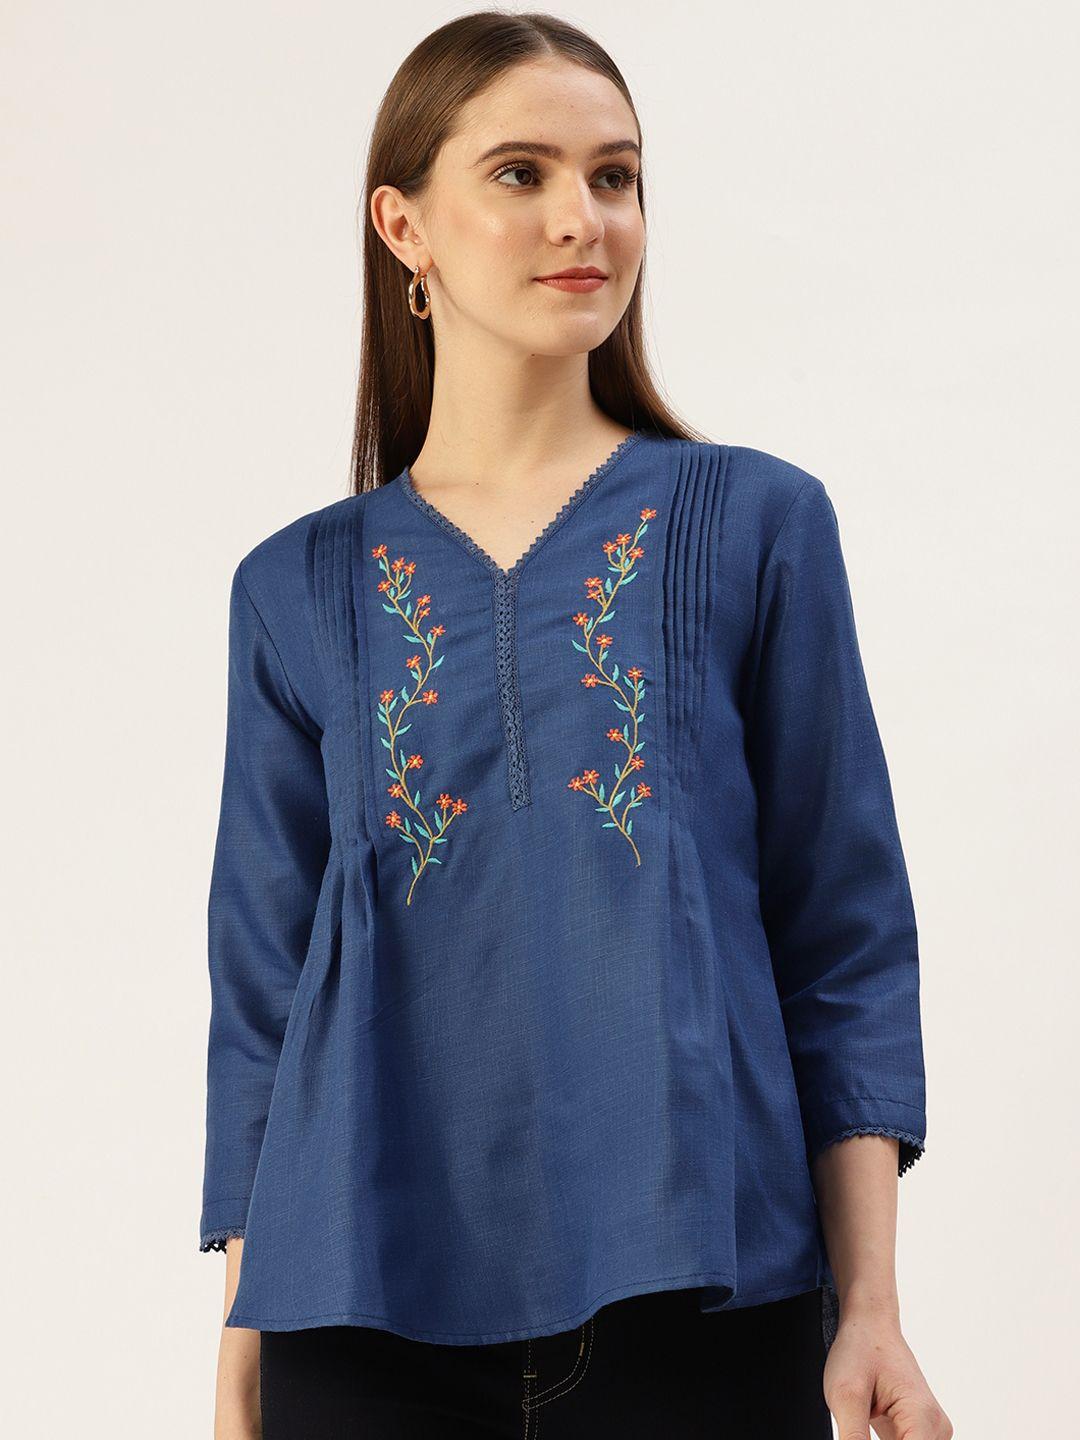 off label navy blue floral embroidered top